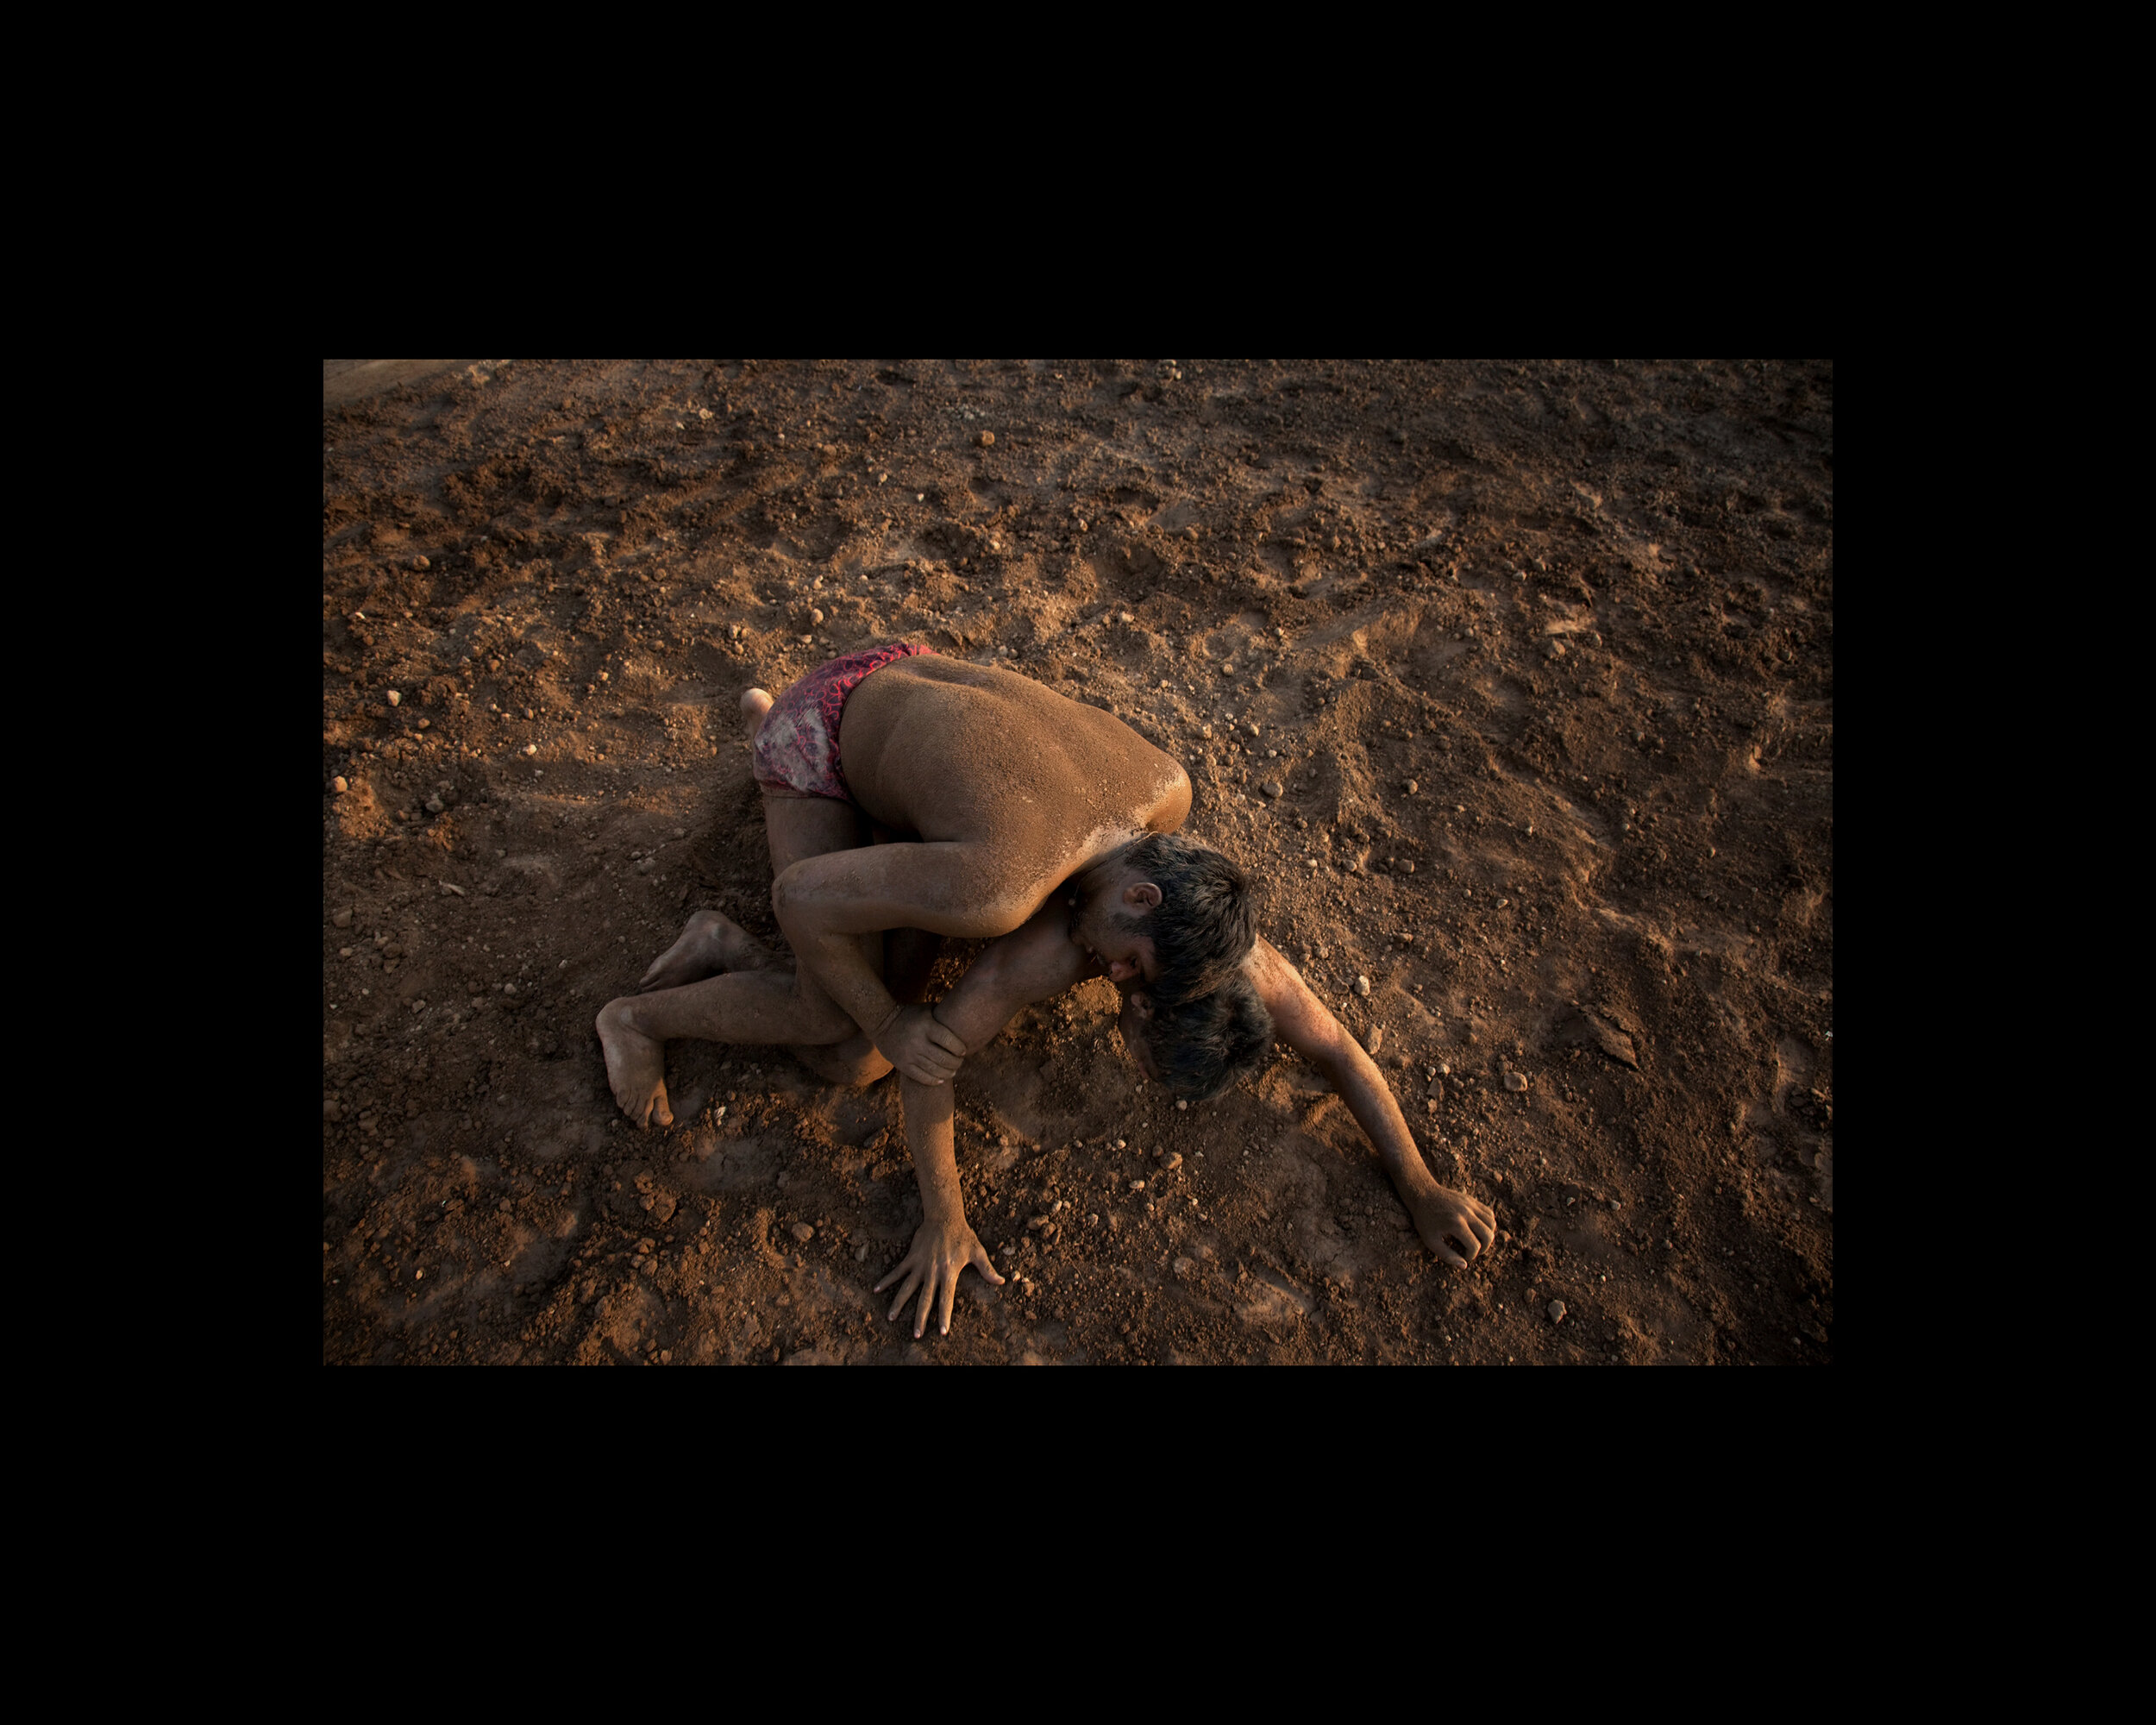  Combatants grapple in the dirt during Kushti, or Pehlwani, a martial art and style of wrestling popular in India, Pakistan, and Bangladesh. Punjab, Pakistan. 2009 